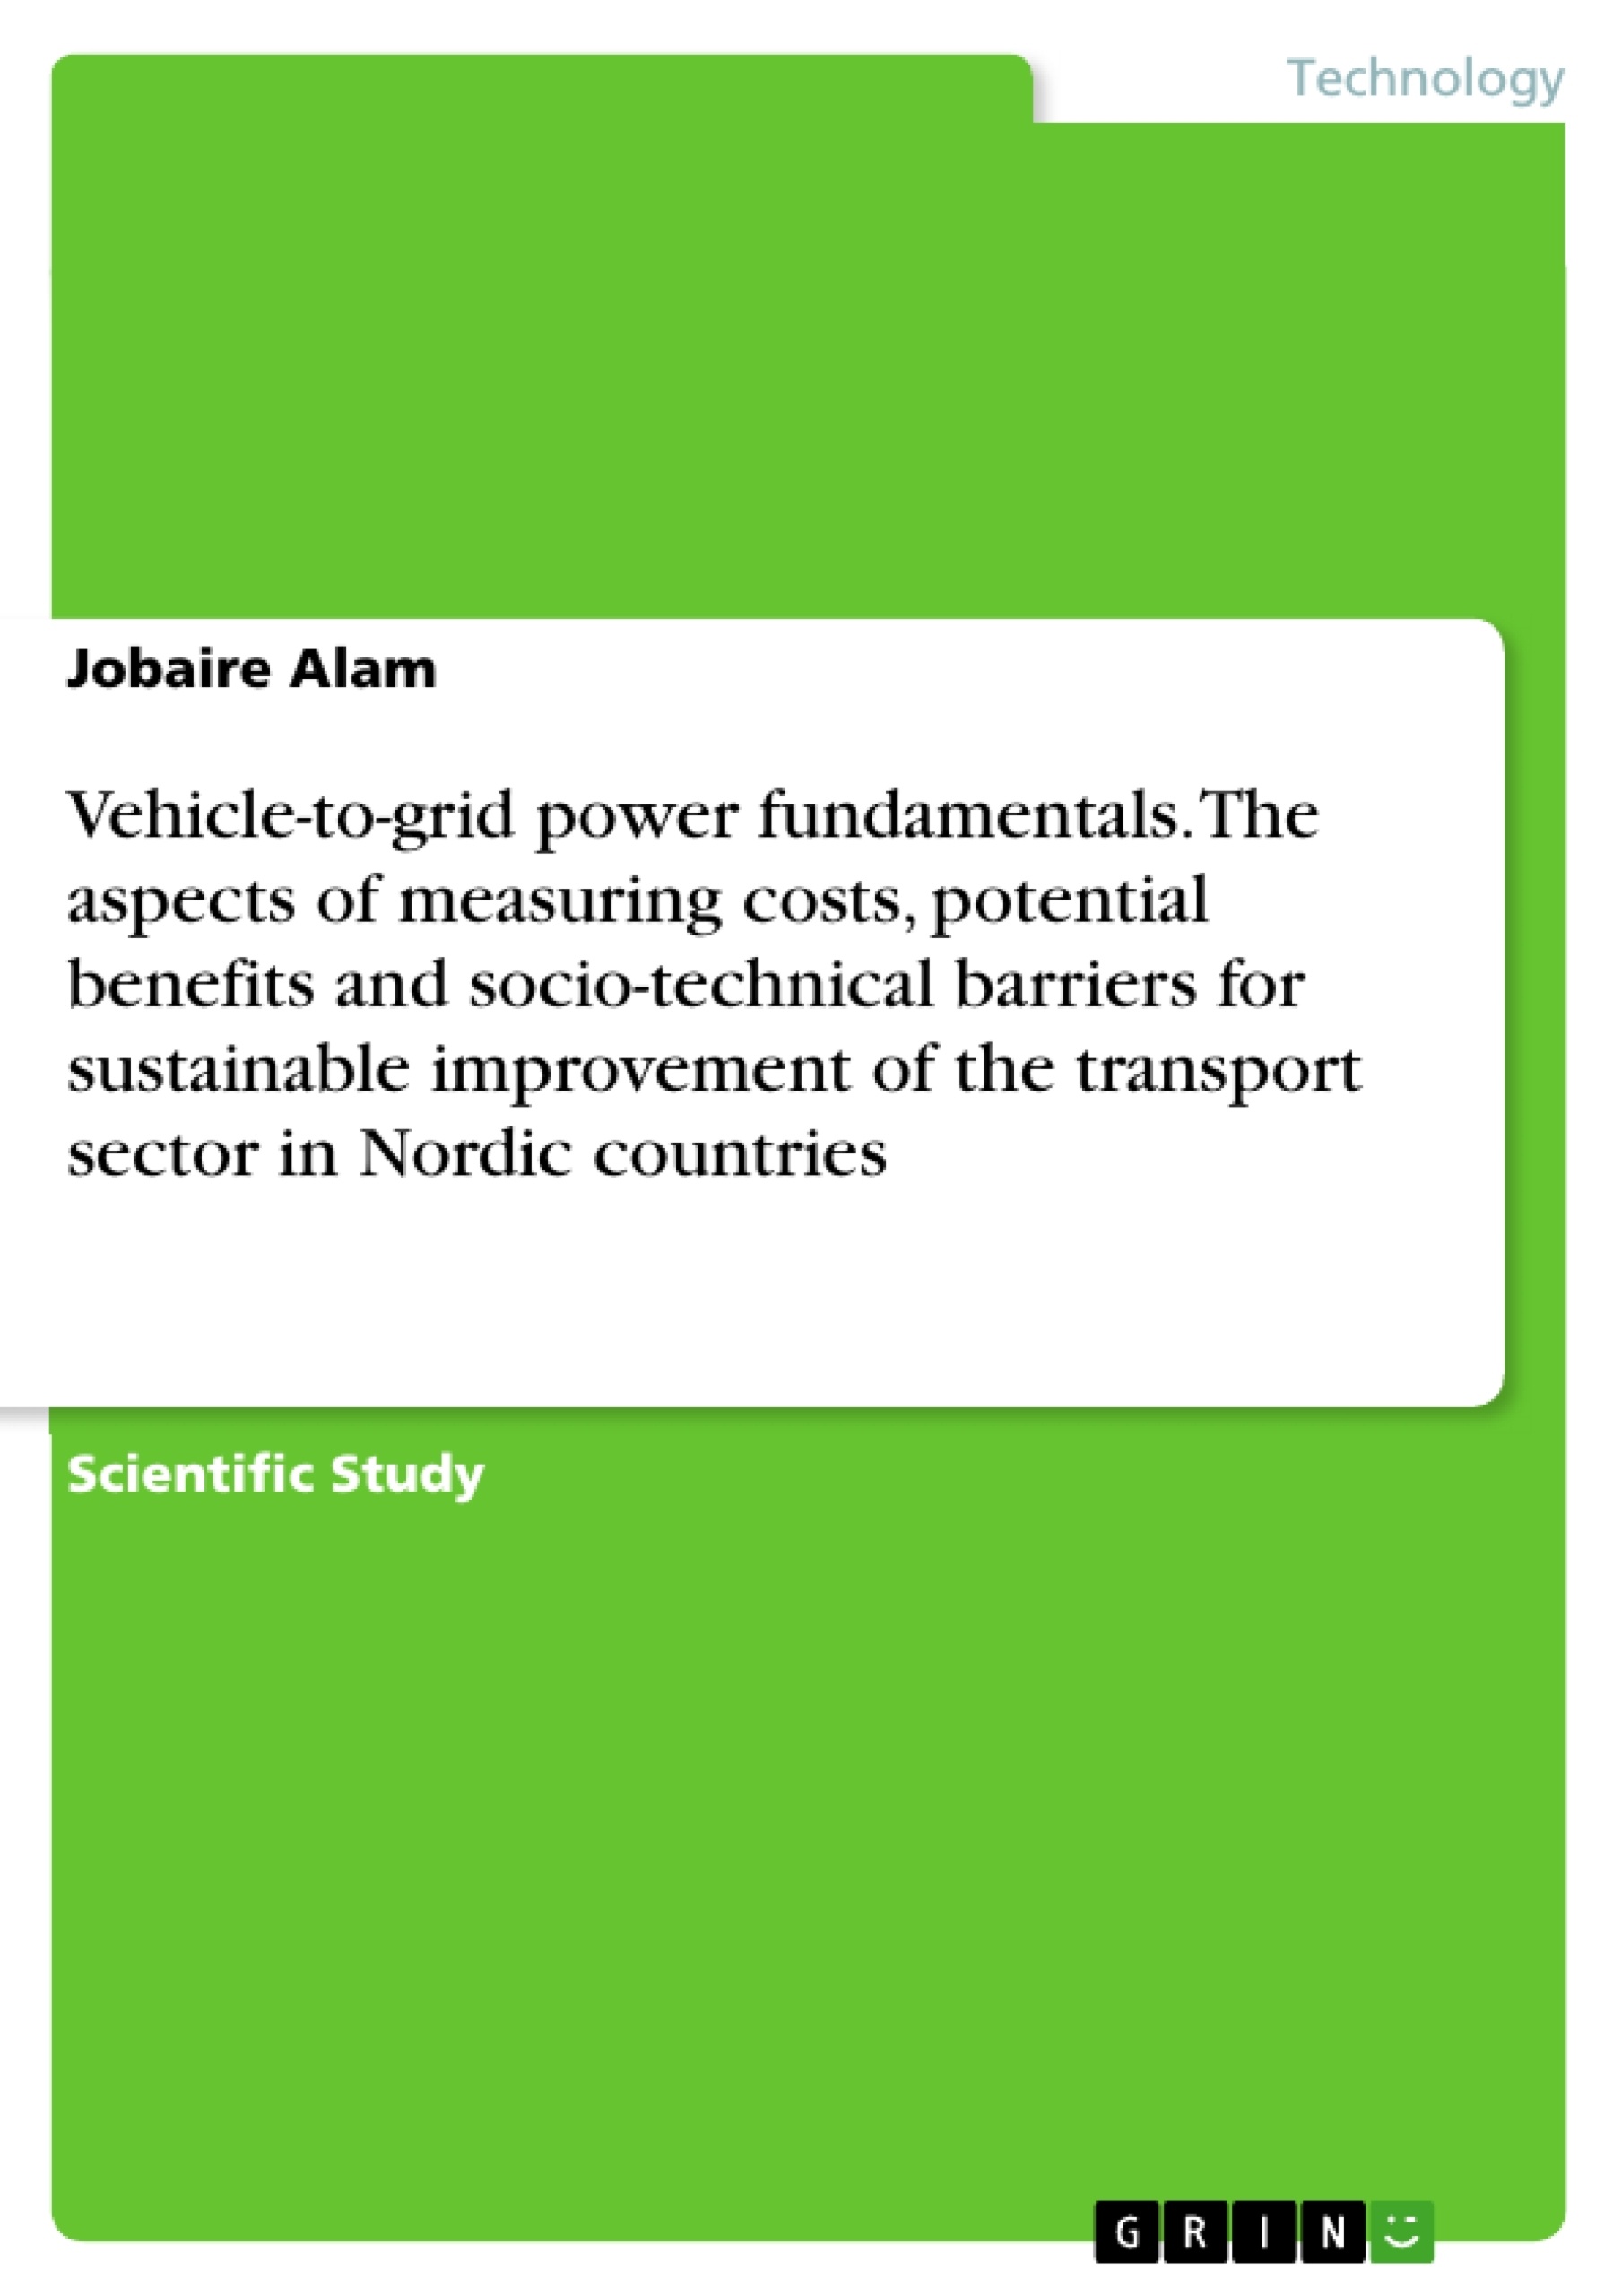 Título: Vehicle-to-grid power fundamentals. The aspects of measuring costs, potential benefits and socio-technical barriers for sustainable improvement of the transport sector in Nordic countries